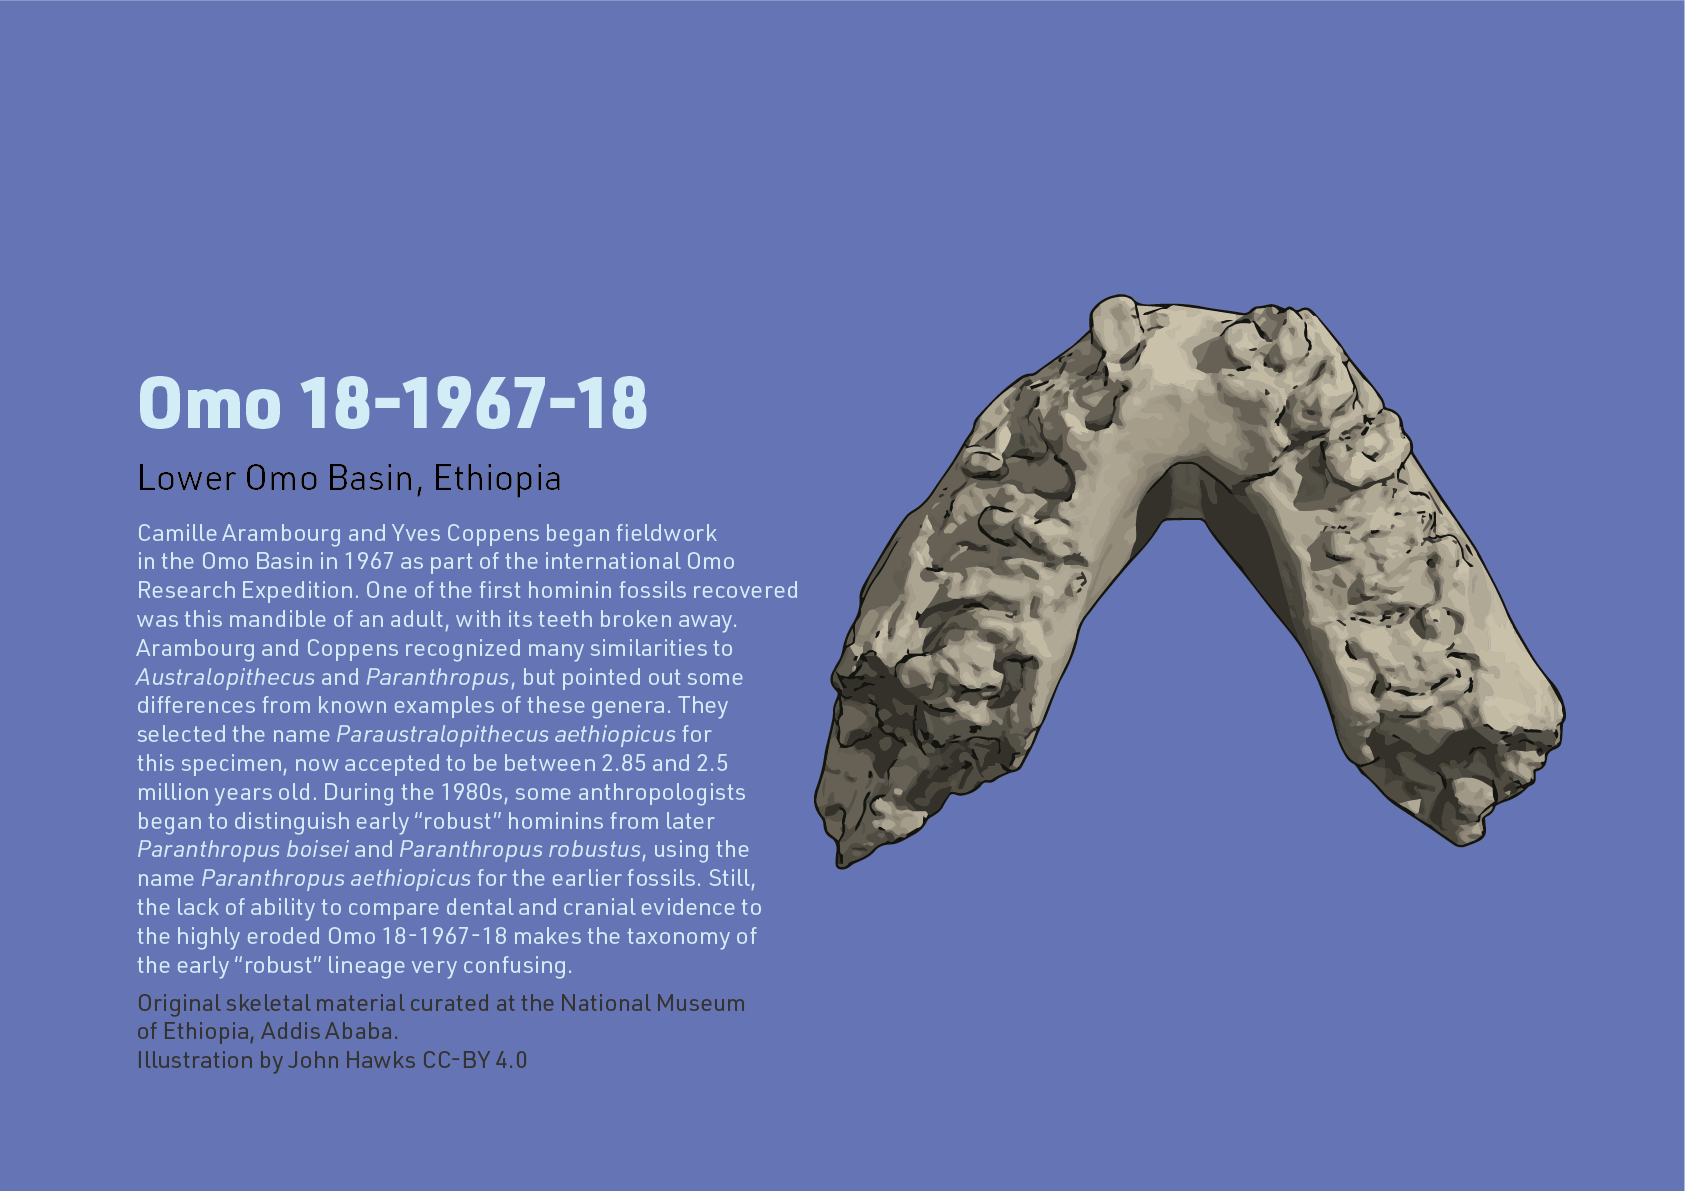 Fact sheet for Omo 18-1967-18 mandible. Text: Camille Arambourg and Yves Coppens began fieldwork  in the Omo Basin in 1967 as part of the international Omo  Research Expedition. One of the first hominin fossils recovered  was this mandible of an adult, with its teeth broken away.  Arambourg and Coppens recognized many similarities to  Australopithecus and Paranthropus, but pointed out some  differences from known examples of these genera. They  selected the name Paraustralopithecus aethiopicus for  this specimen, now accepted to be between 2.85 and 2.5  million years old. During the 1980s, some anthropologists began to distinguish early “robust” hominins from later  Paranthropus boisei and Paranthropus robustus, using the name Paranthropus aethiopicus for the earlier fossils. Still,  the lack of ability to compare dental and cranial evidence to the highly eroded Omo 18-1967-18 makes the taxonomy of  the early “robust” lineage very confusing.